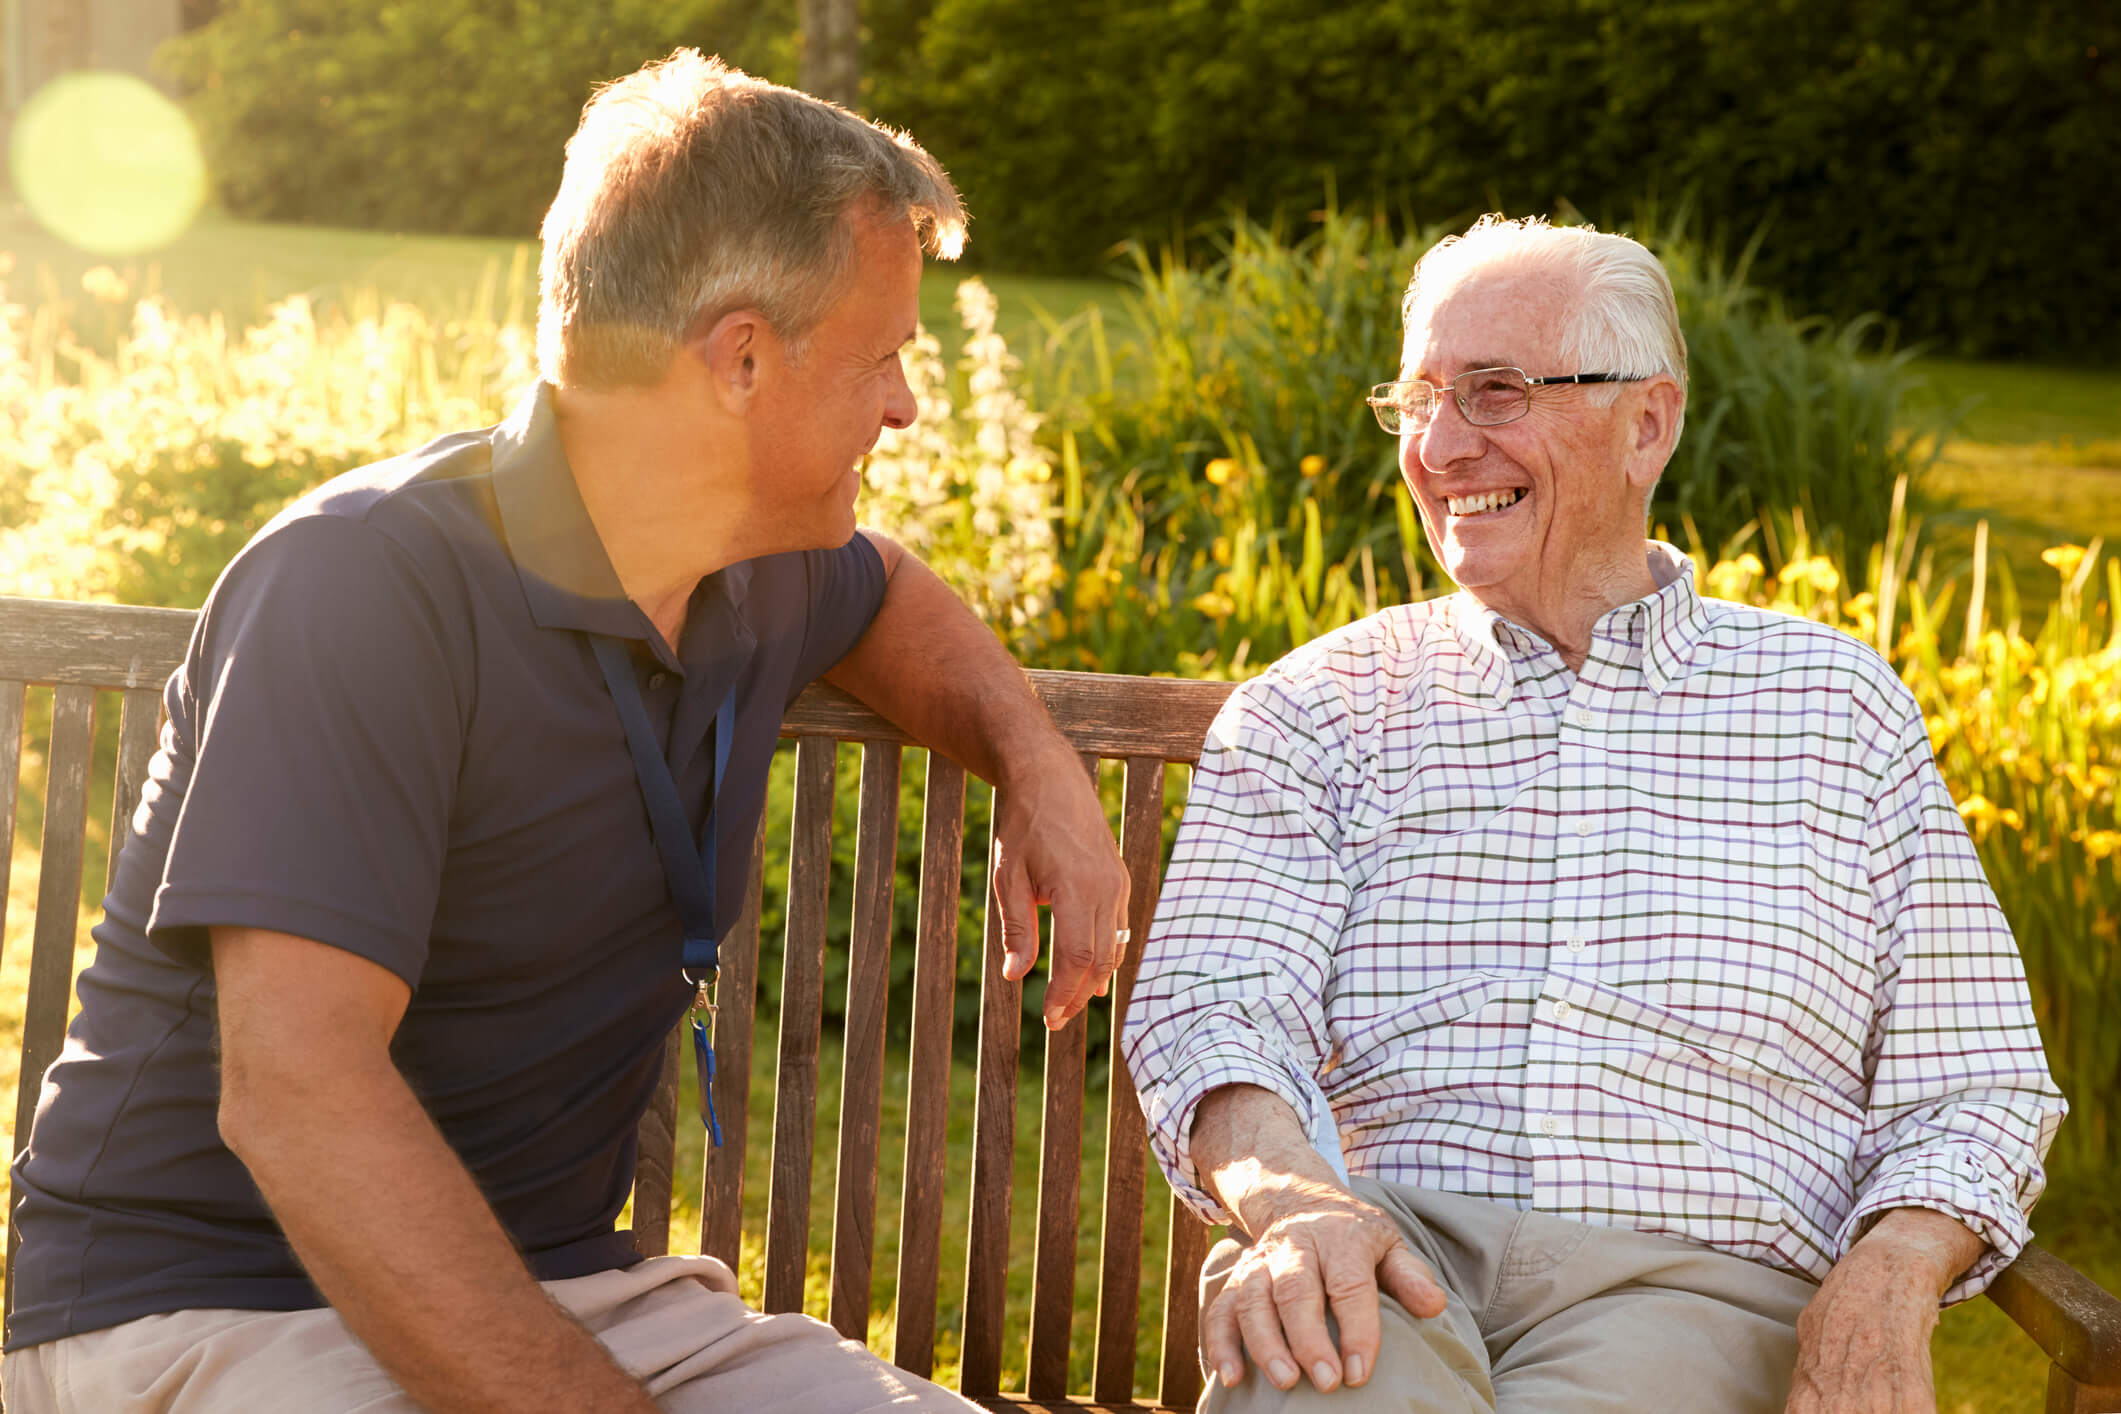 Son and elderly father sit together on a bench